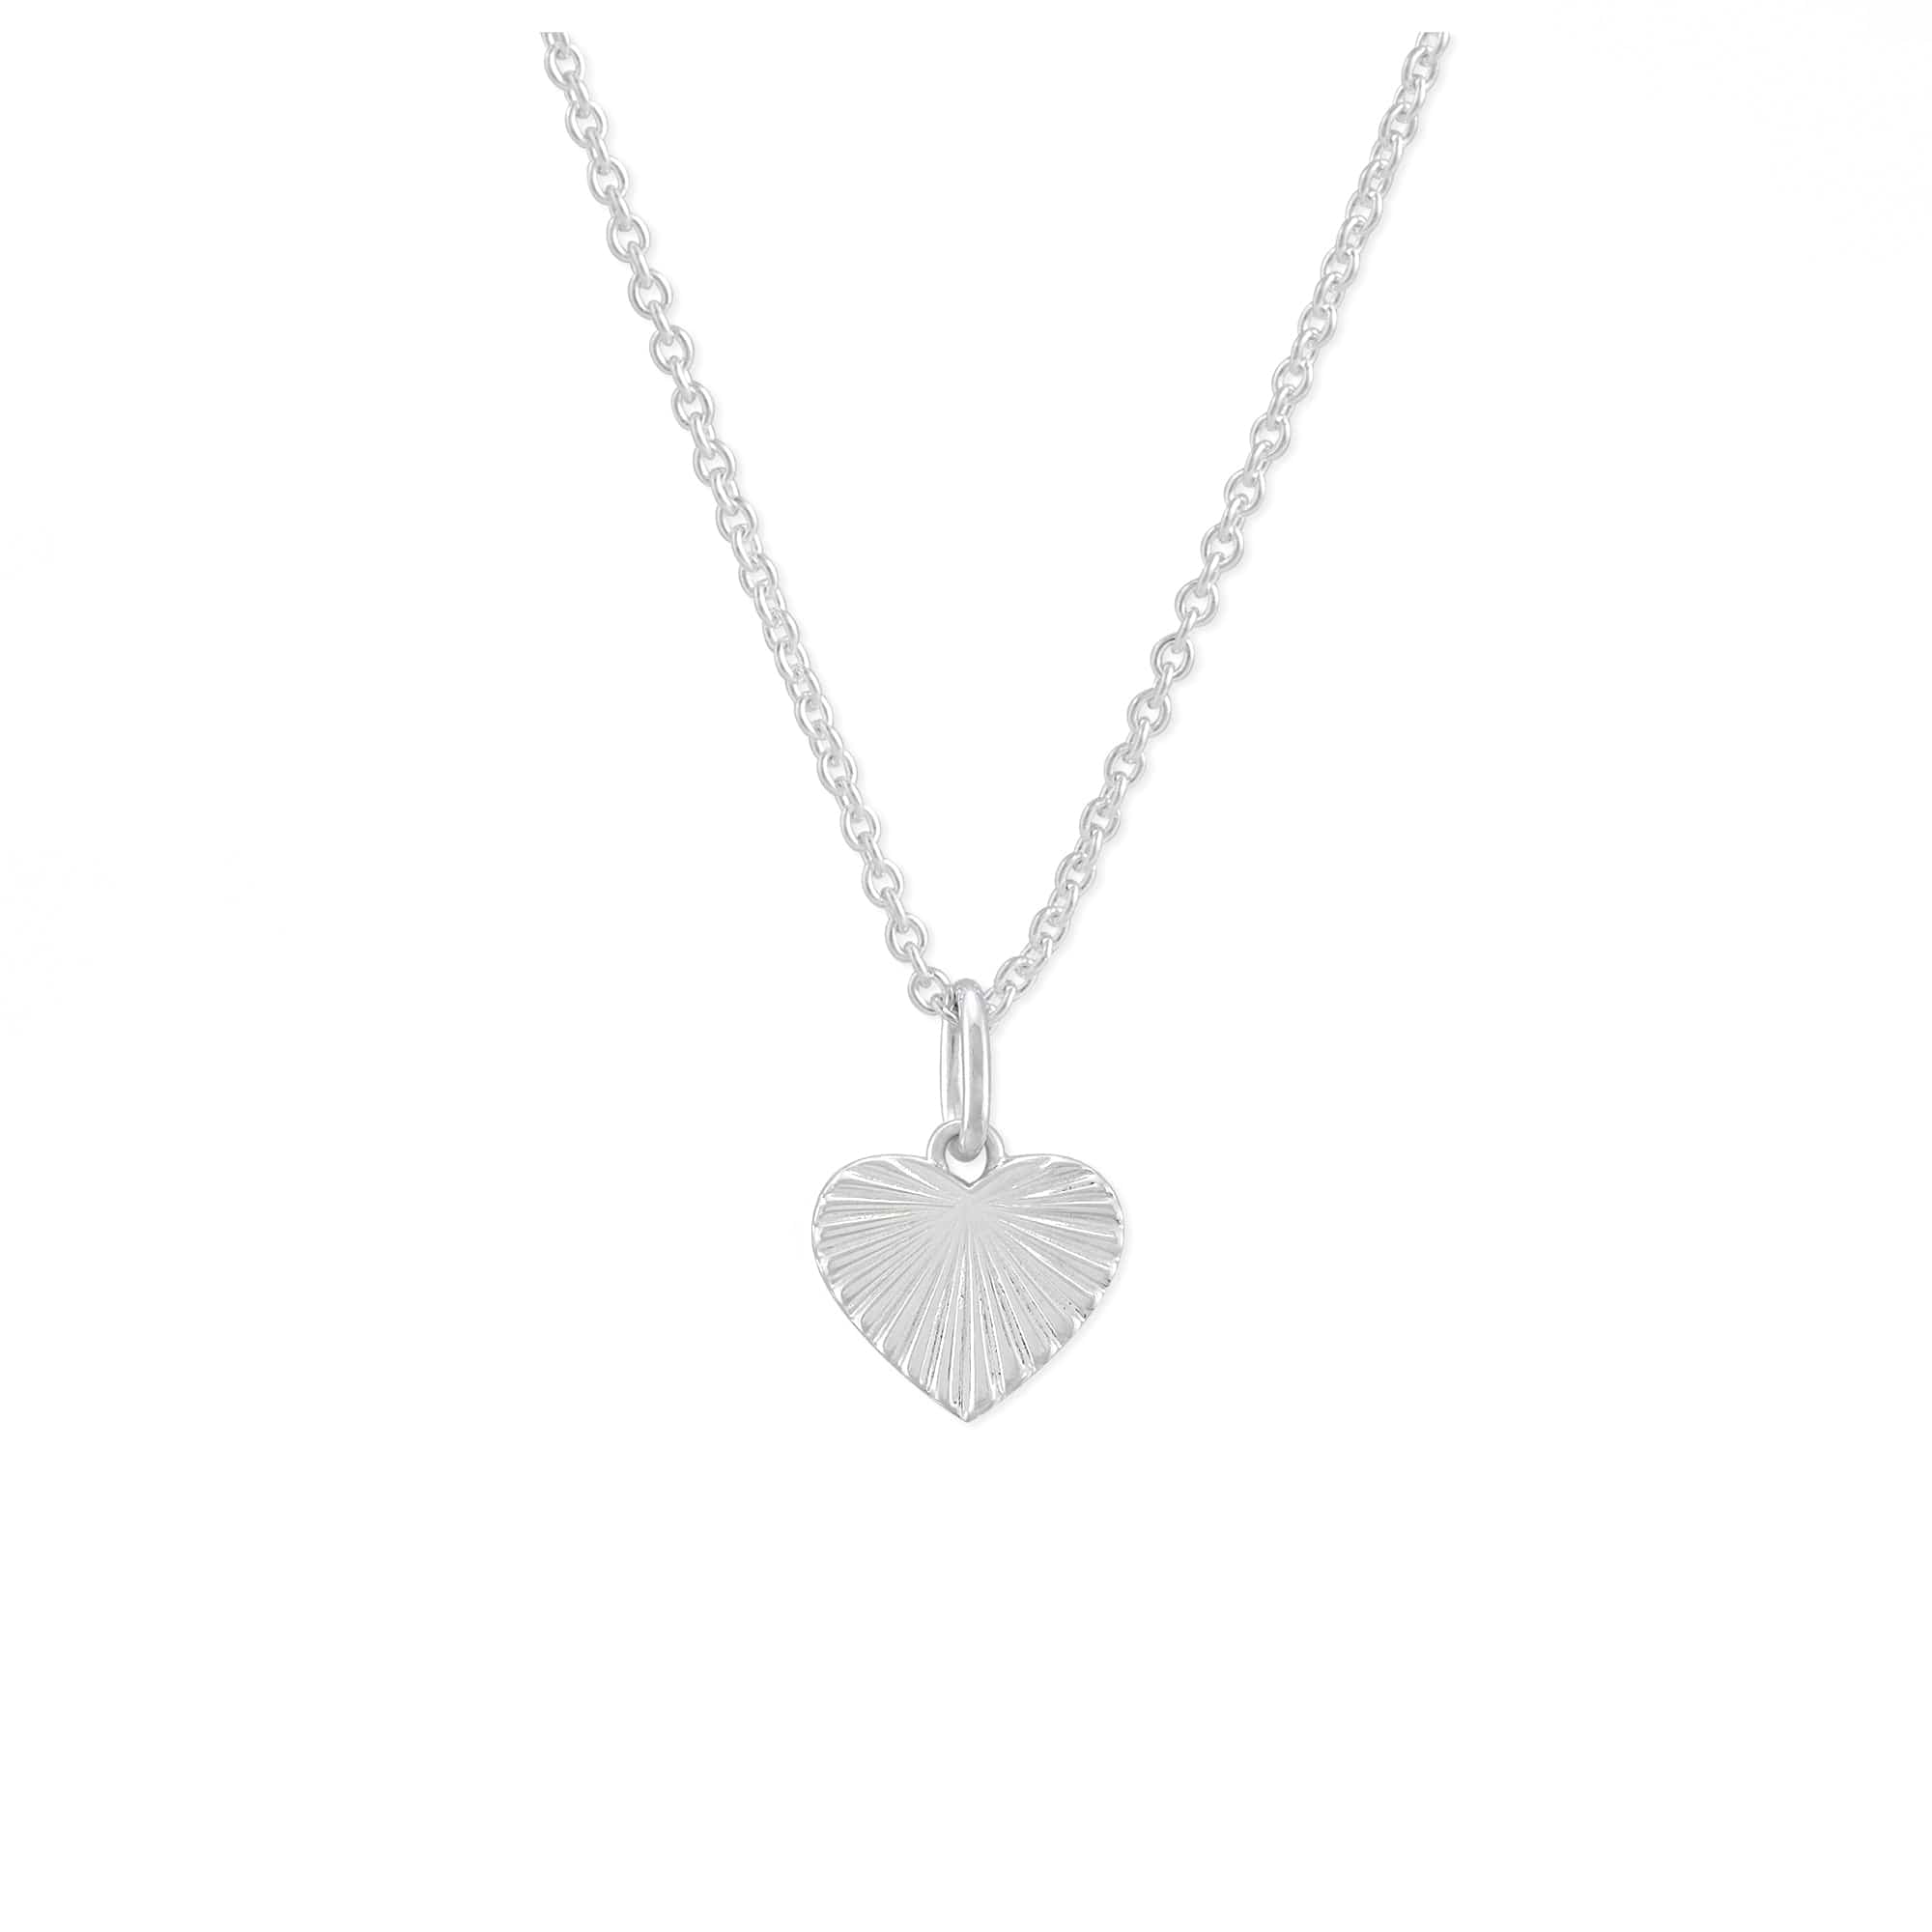 Boma Jewelry Necklaces Ava Heart Necklace